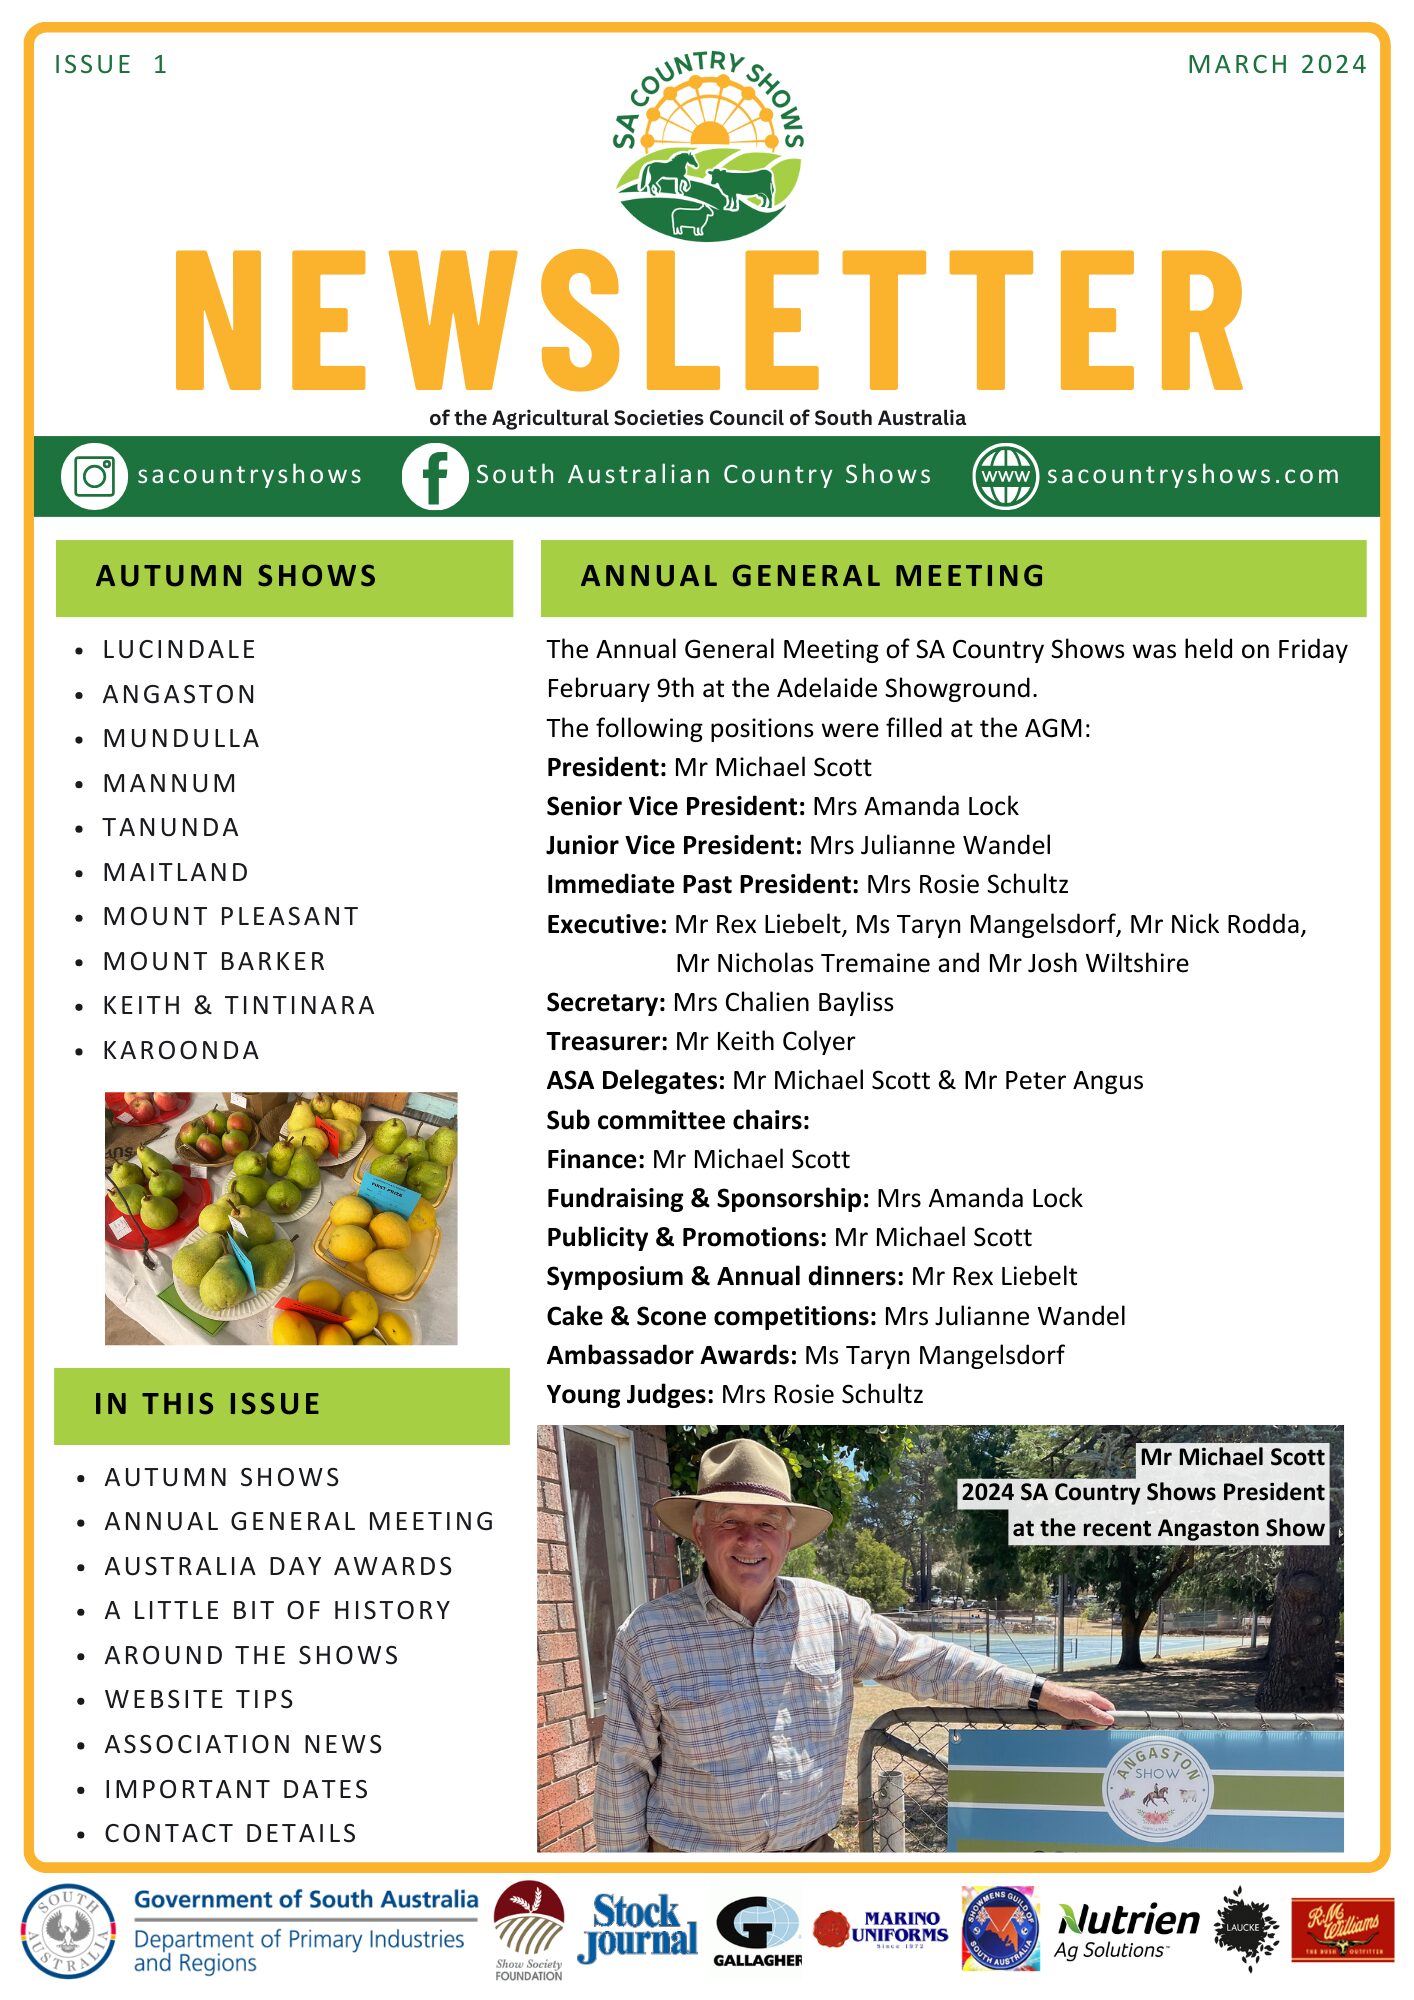 Issue 1, March 2024 Newsletter